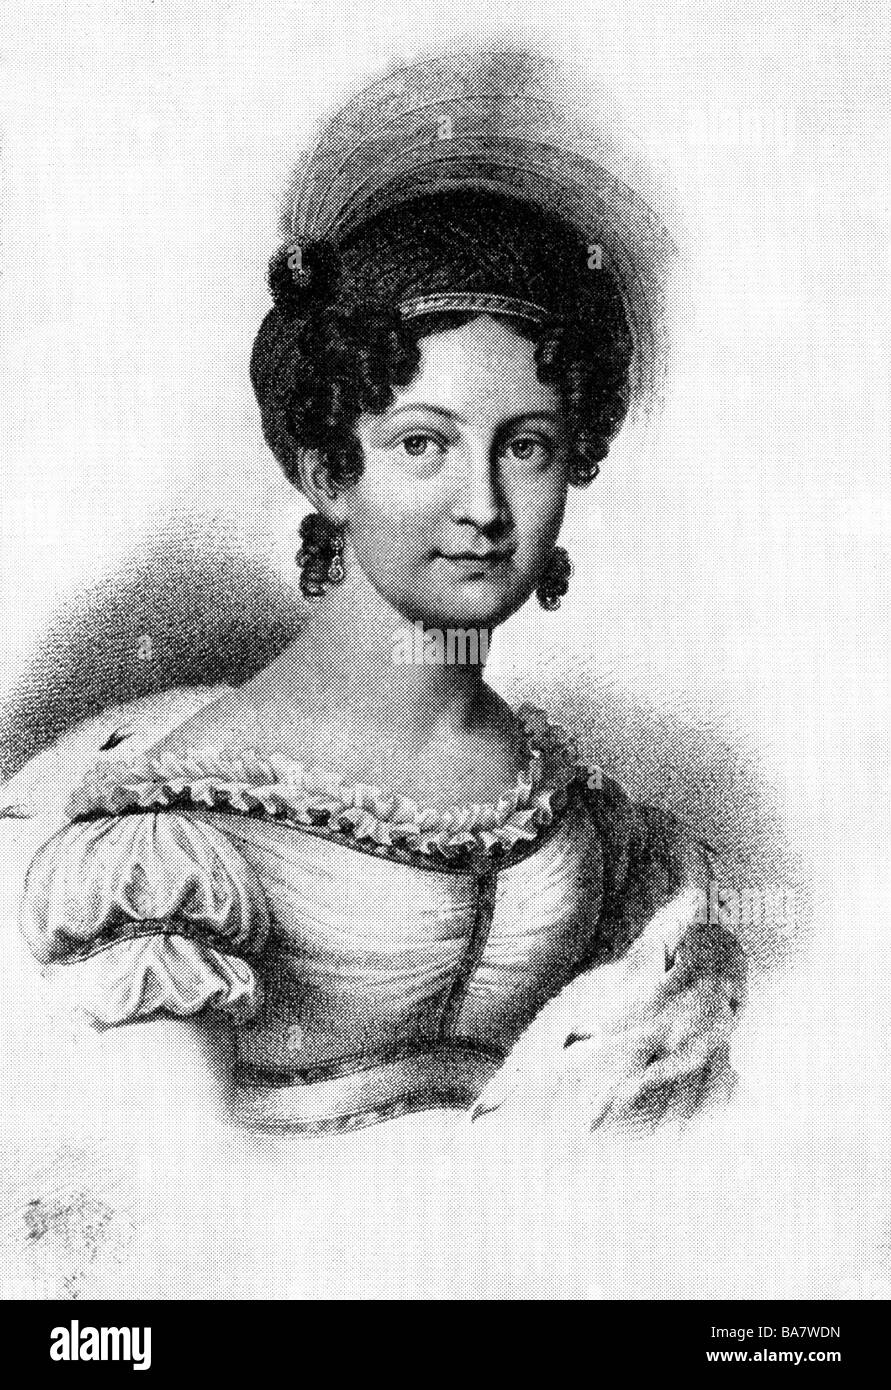 Therese Charlotte, 8.7.1792 - 26.10.1854, Queen Consort of Bavaria 13.10.1825 - 20.3.1848, portrait, lithograph, 19th century, , Stock Photo